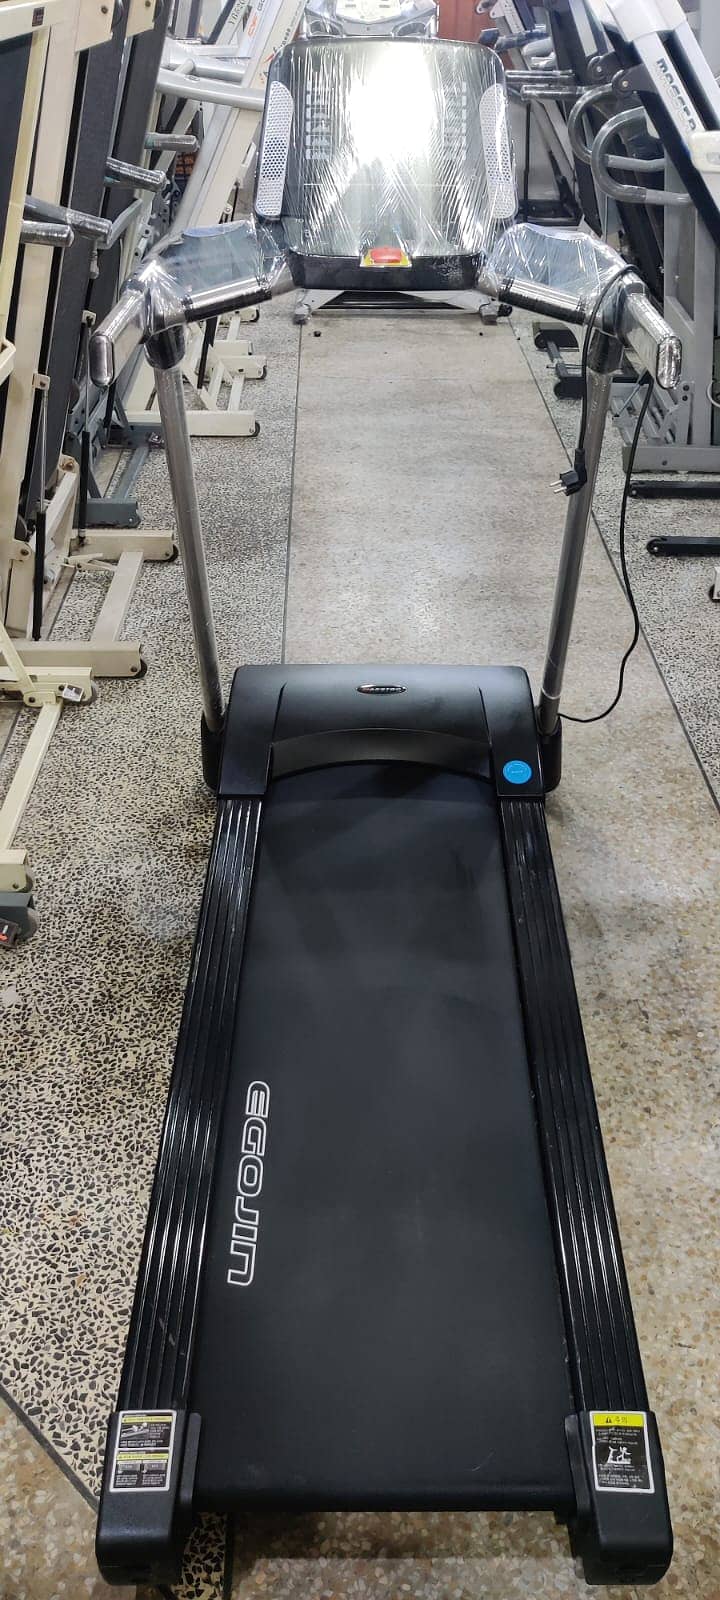 Treadmill Cycle Elliptical Running Machine Cardio Home & Commercial KW 3